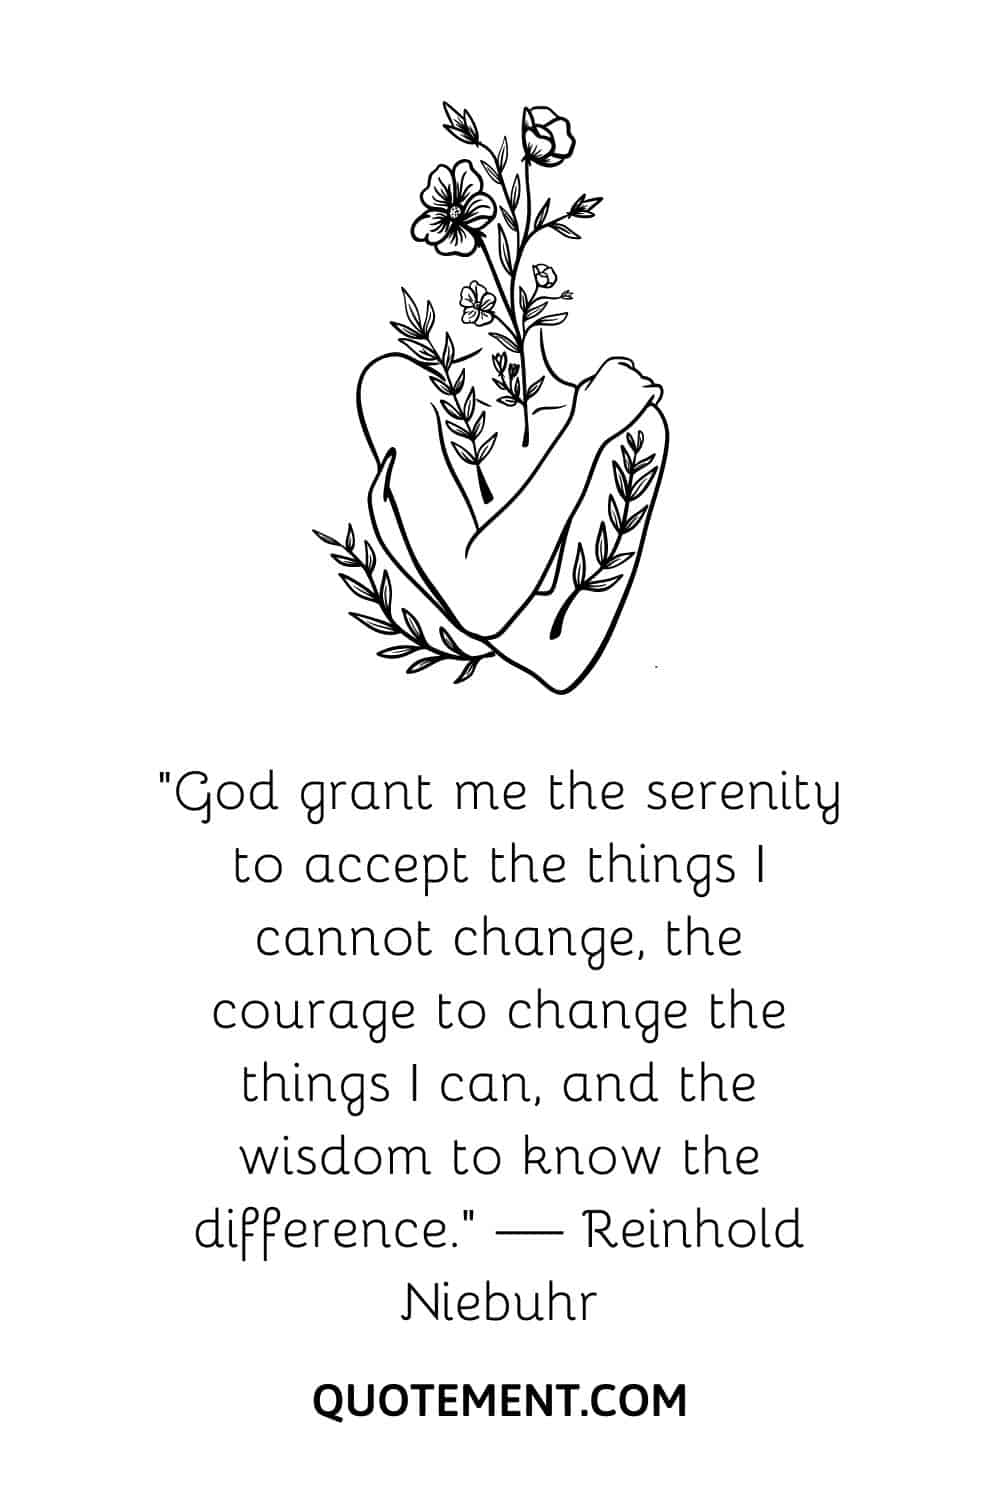 “God grant me the serenity to accept the things I cannot change, the courage to change the things I can, and the wisdom to know the difference.” — Reinhold Niebuhr